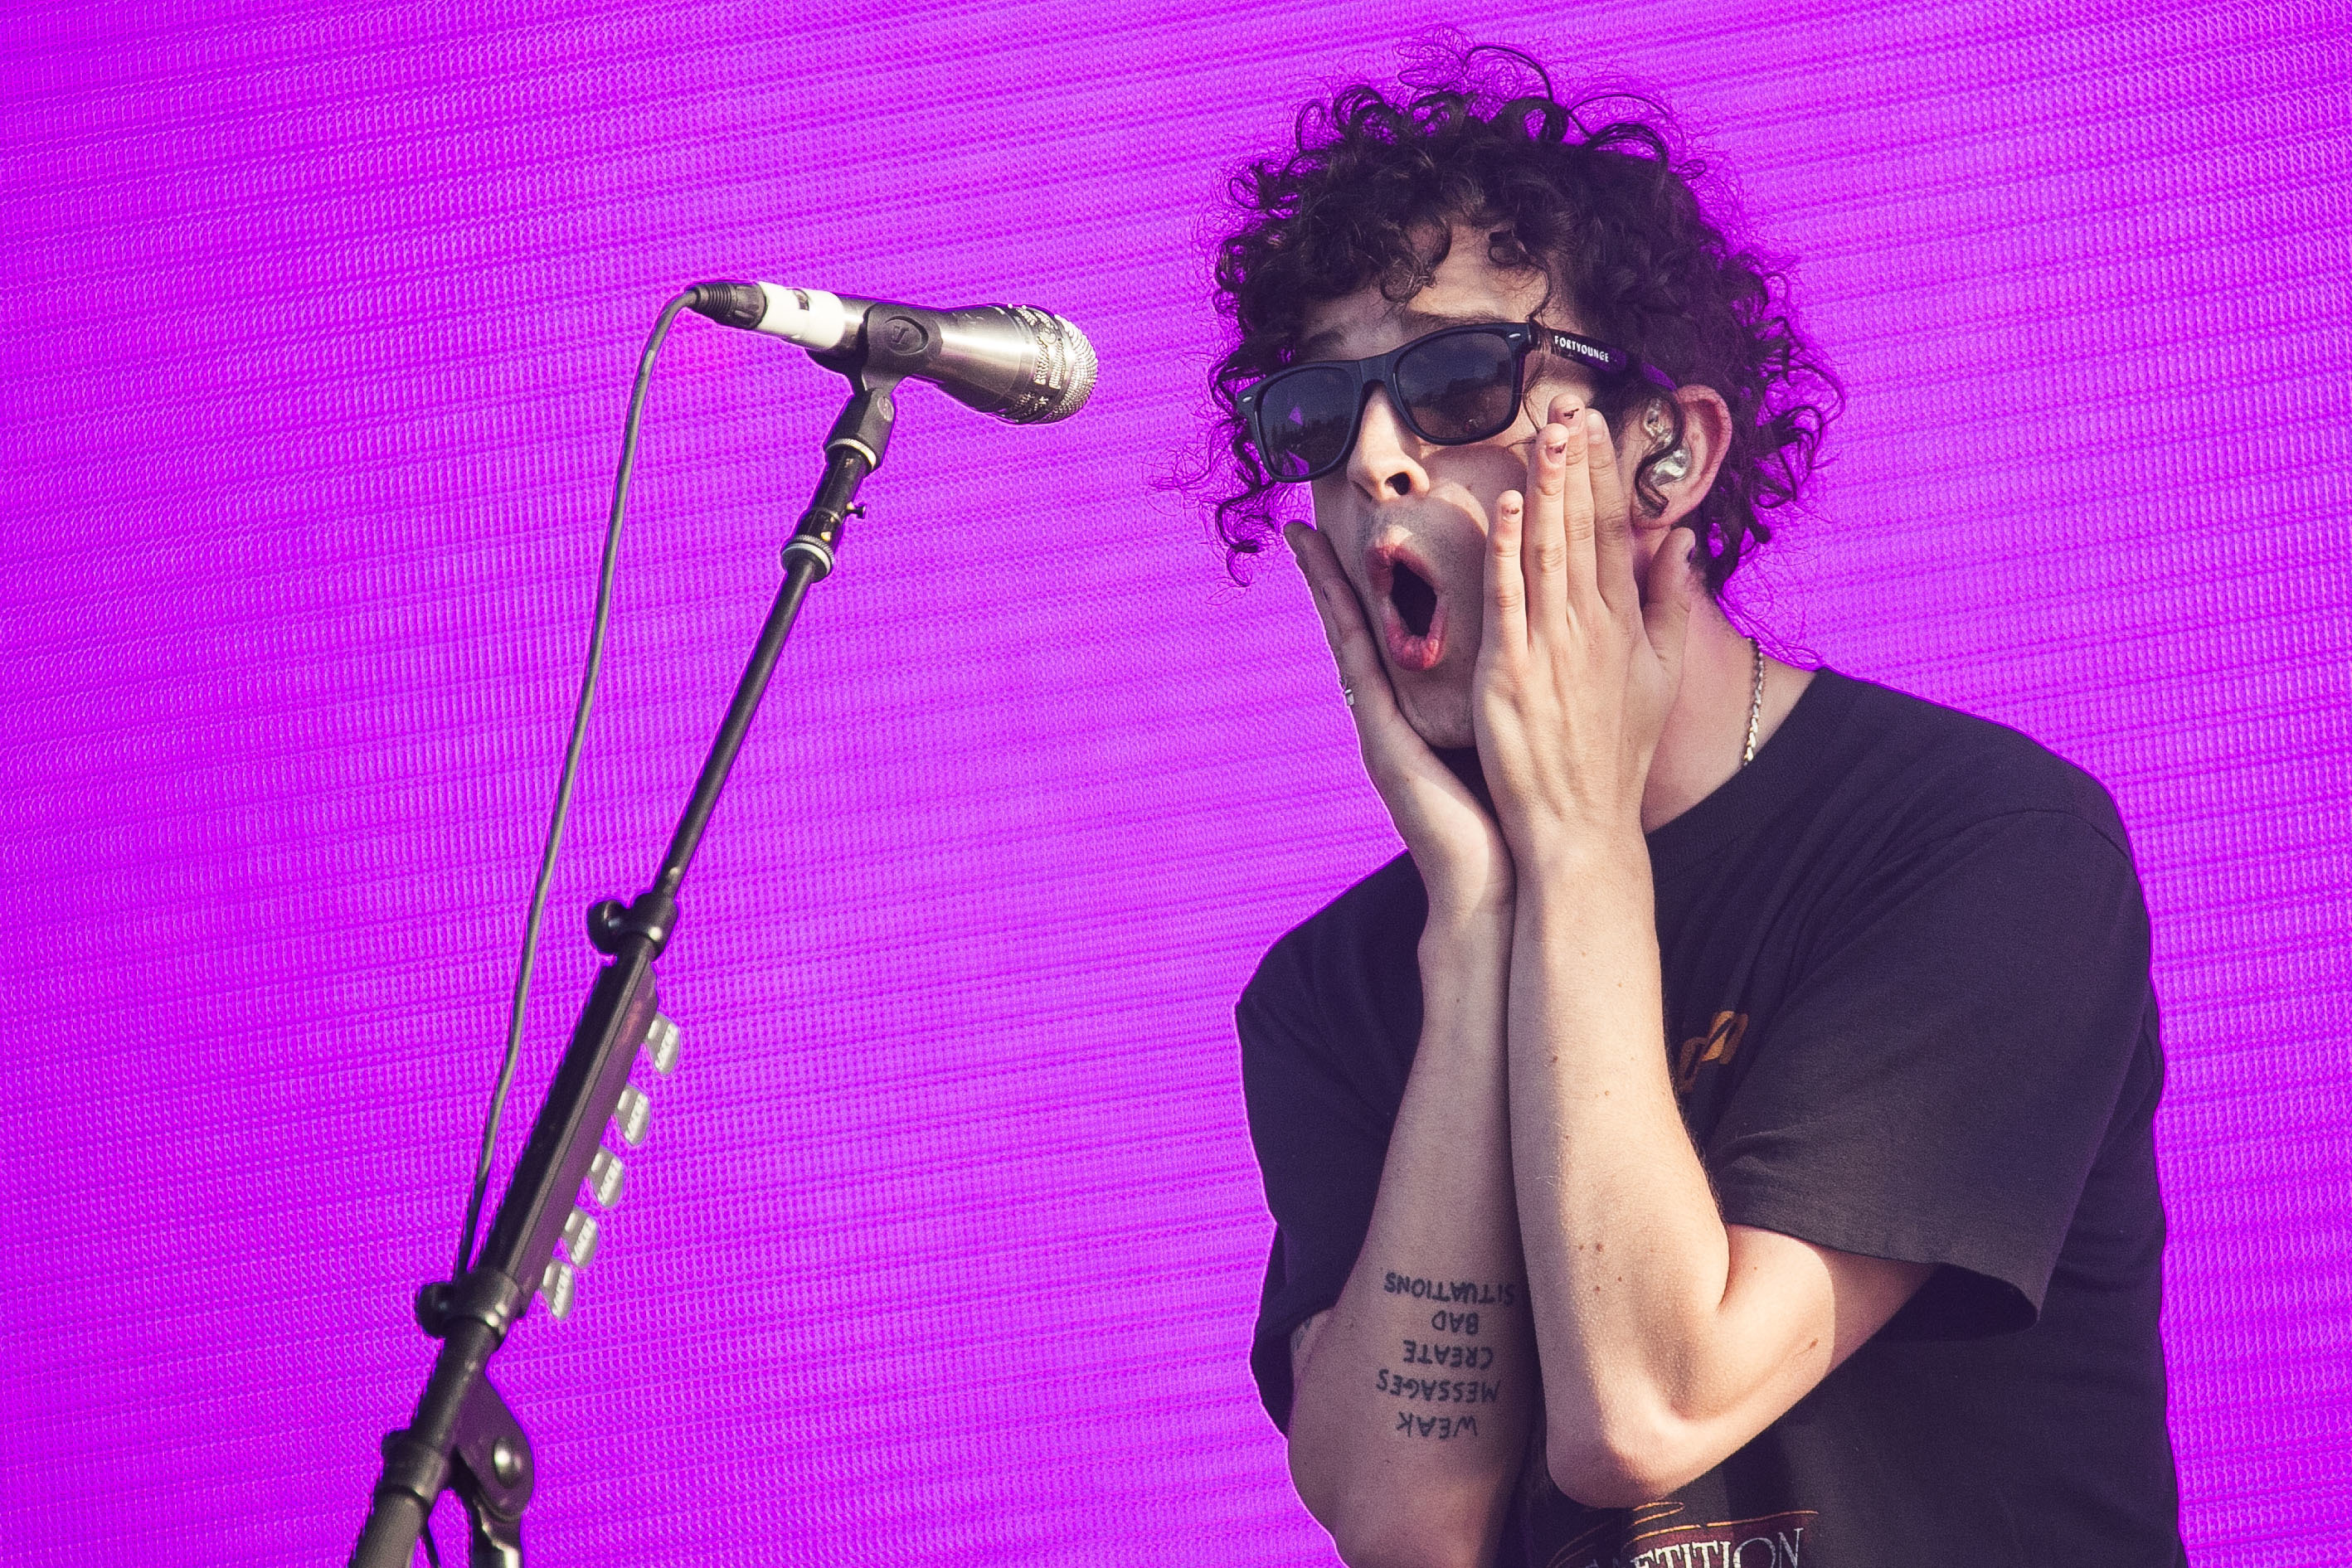 This July 8, 2016 file photo shows Matthew Healy of the English rock band The 1975. (Photo by Joel Ryan/Invision/AP)